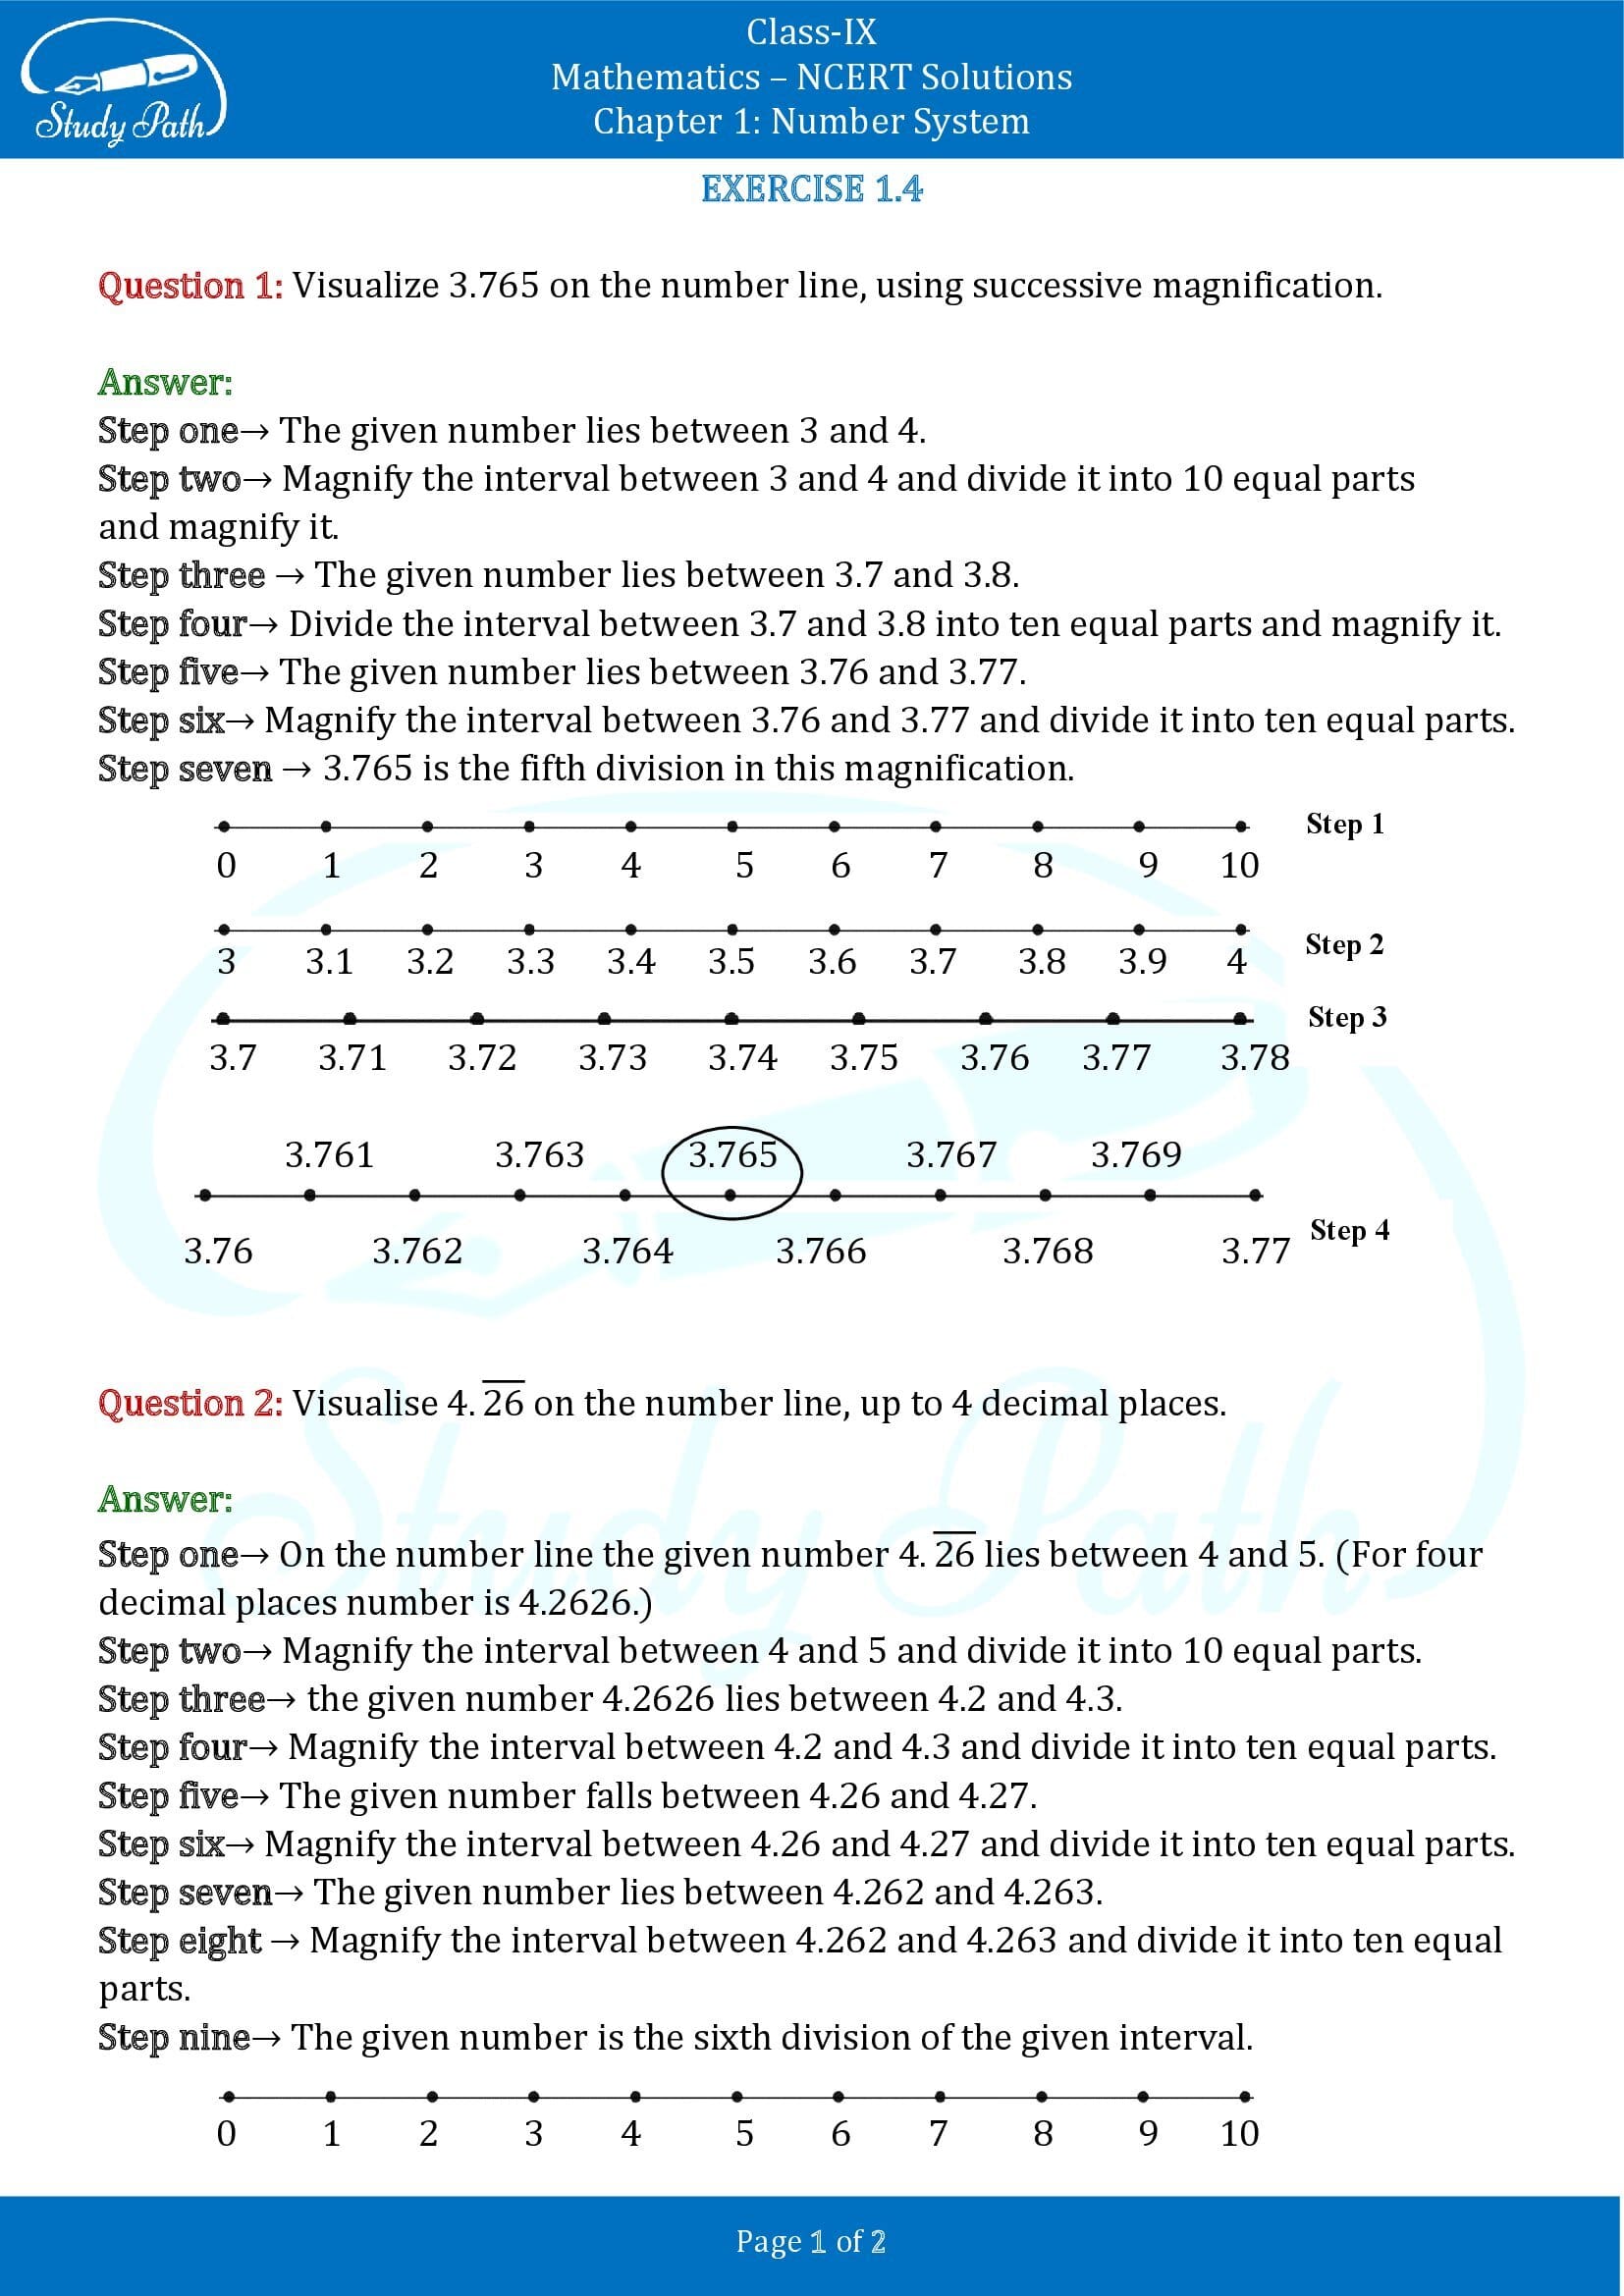 NCERT Solutions for Class 9 Maths Chapter 1 Number System Exercise 1.4 00001 1